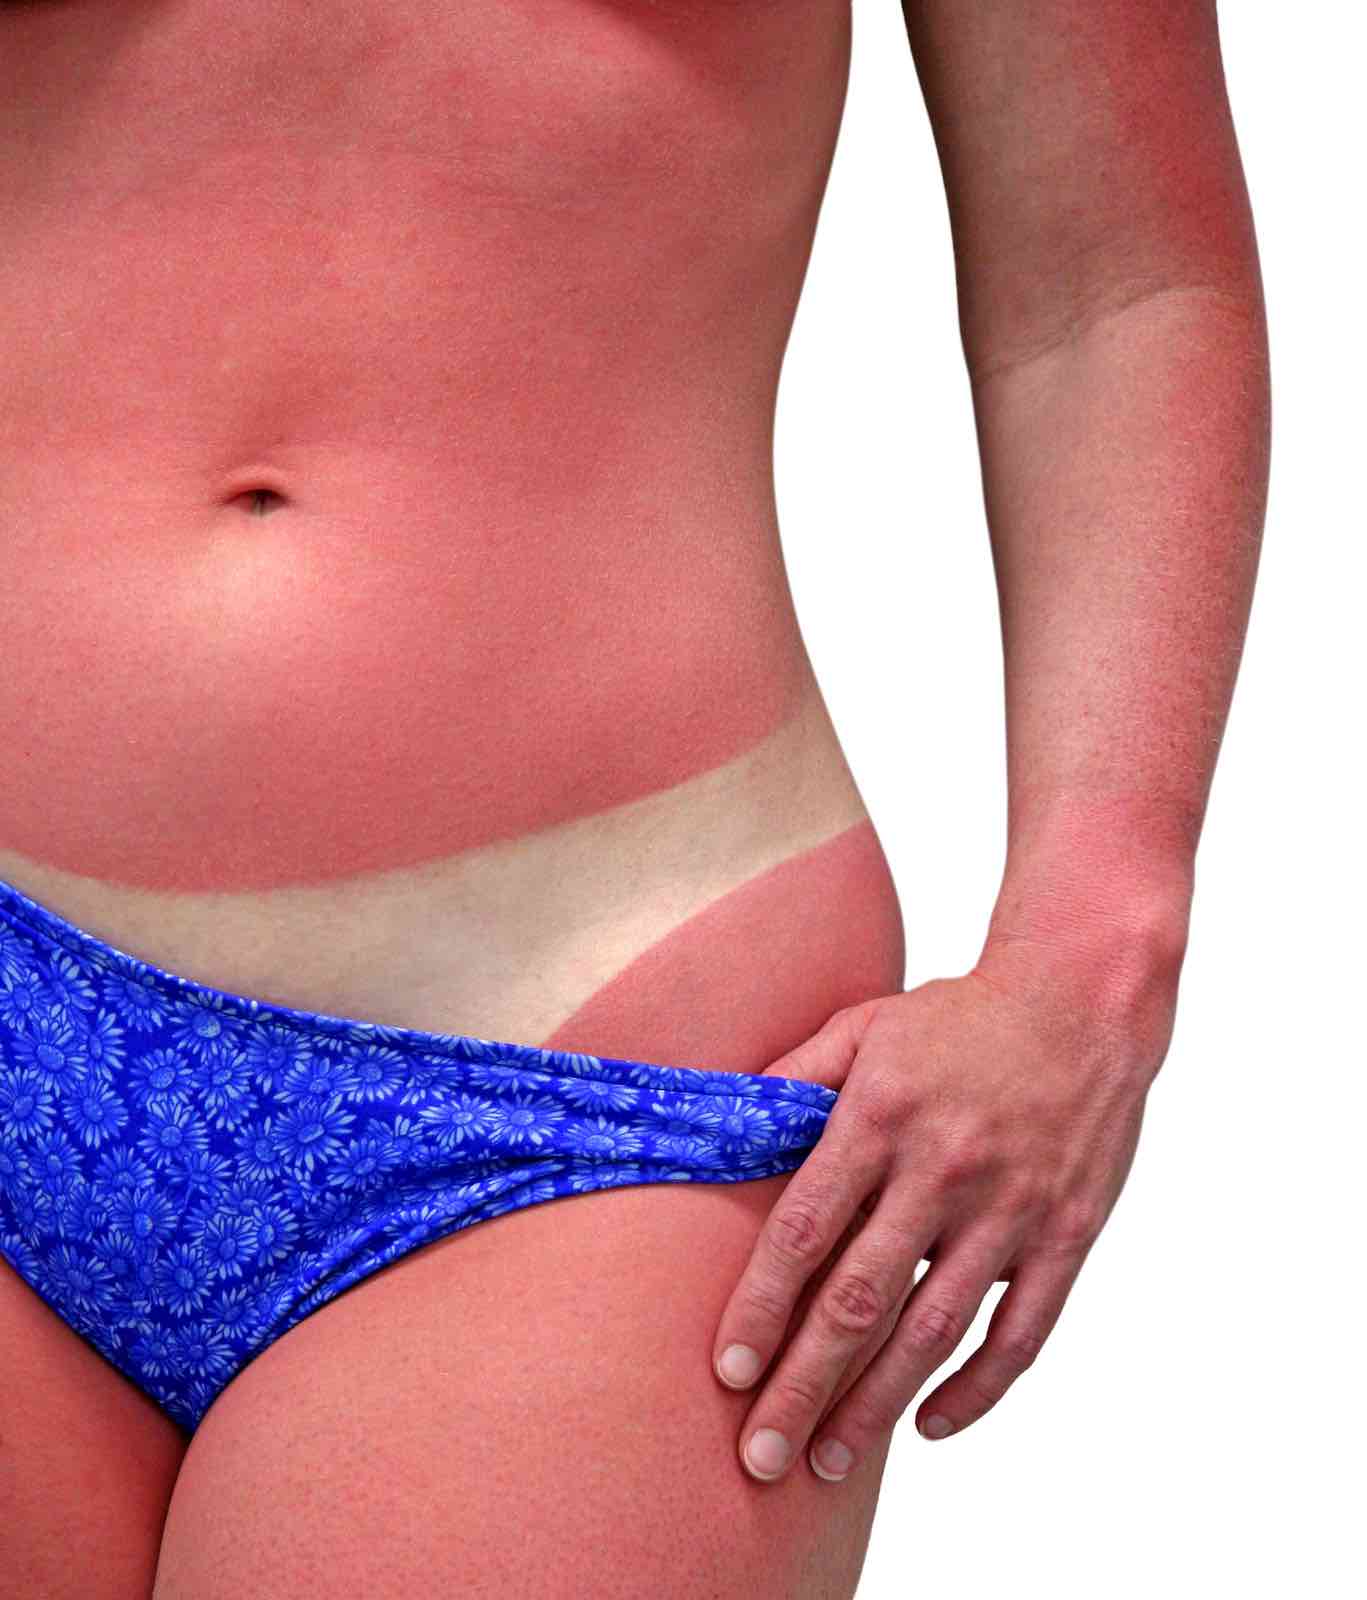 sunburn is a safety issue